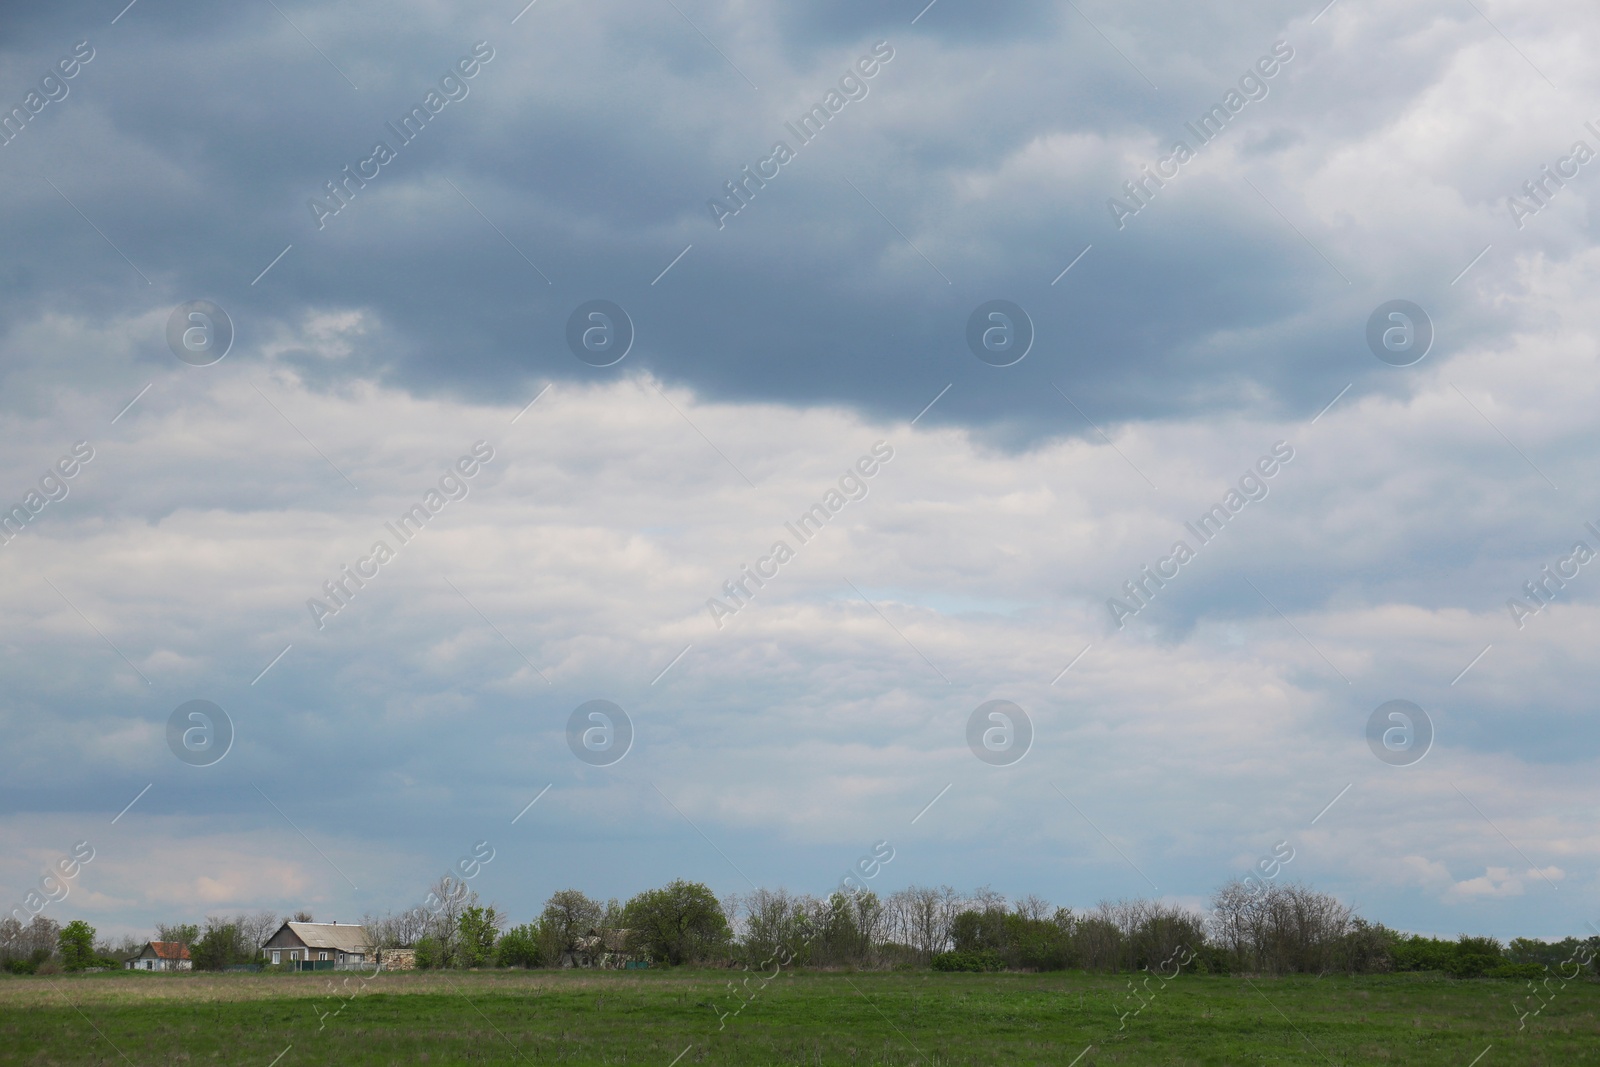 Photo of Houses under cloudy sky. Picturesque rural landscape